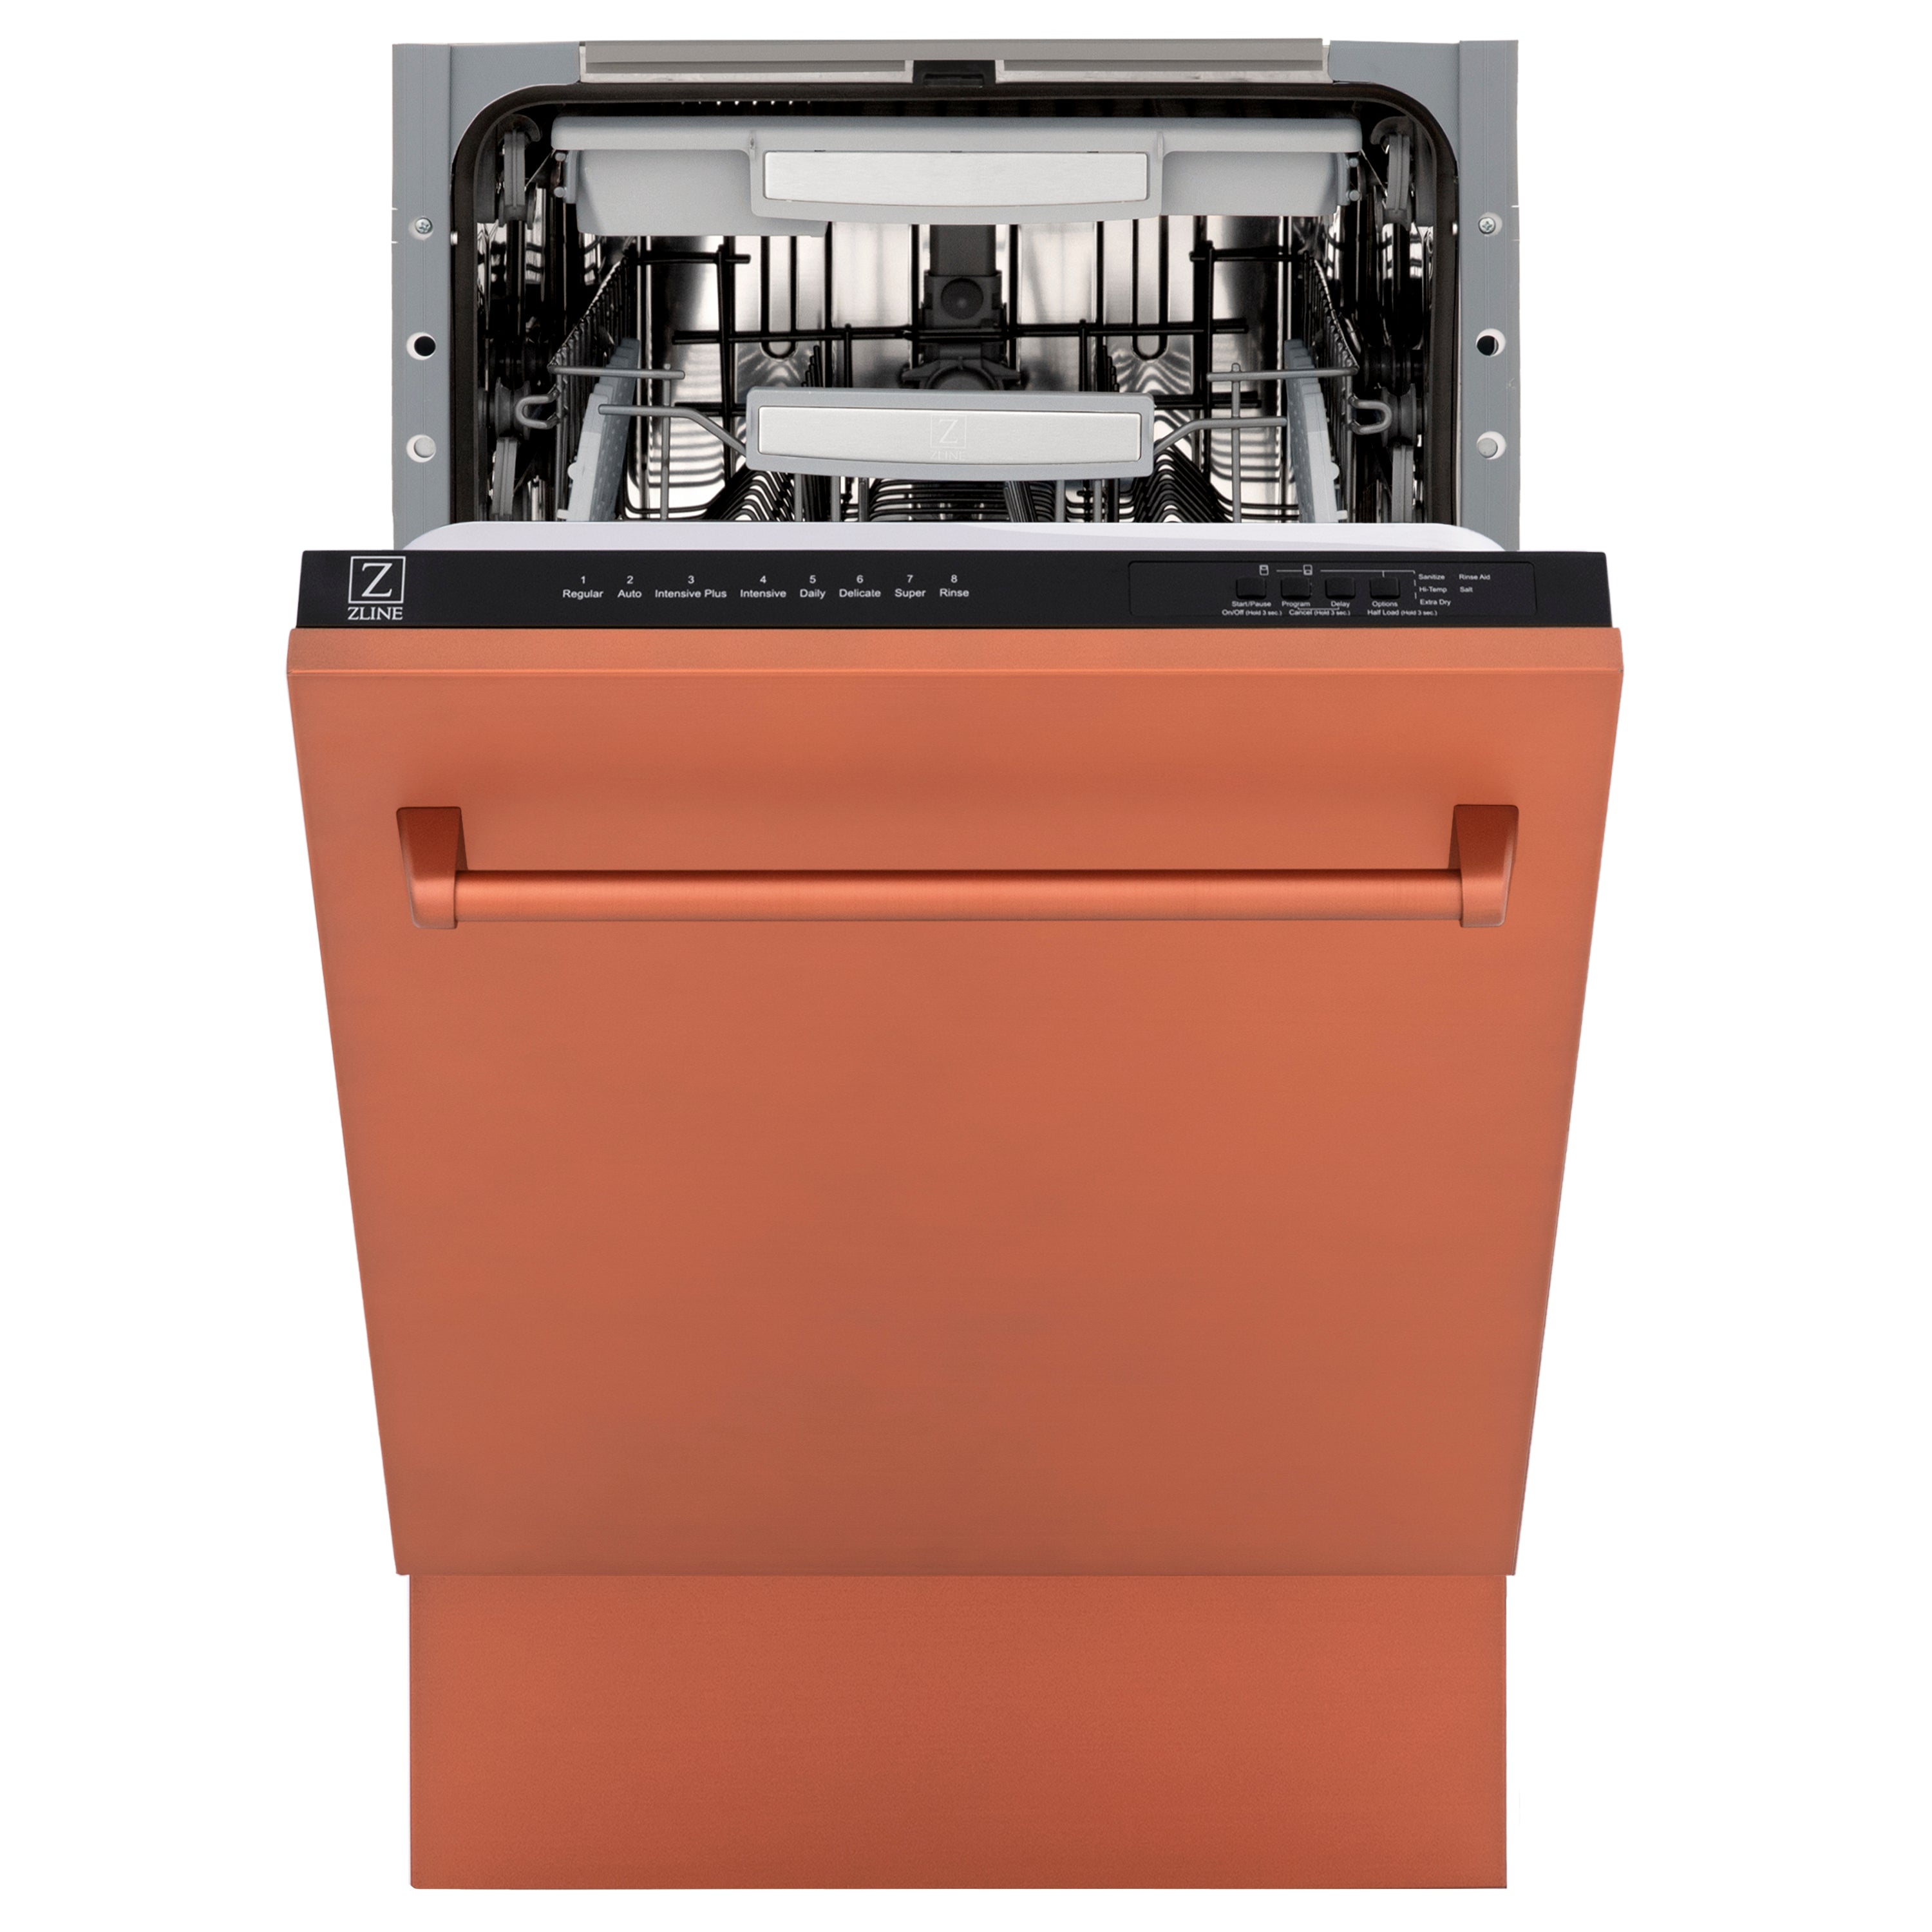 ZLINE 18" Tallac Series 3rd Rack Top Control Dishwasher in Copper with Stainless Steel Tub, 51dBa (DWV-C-18)